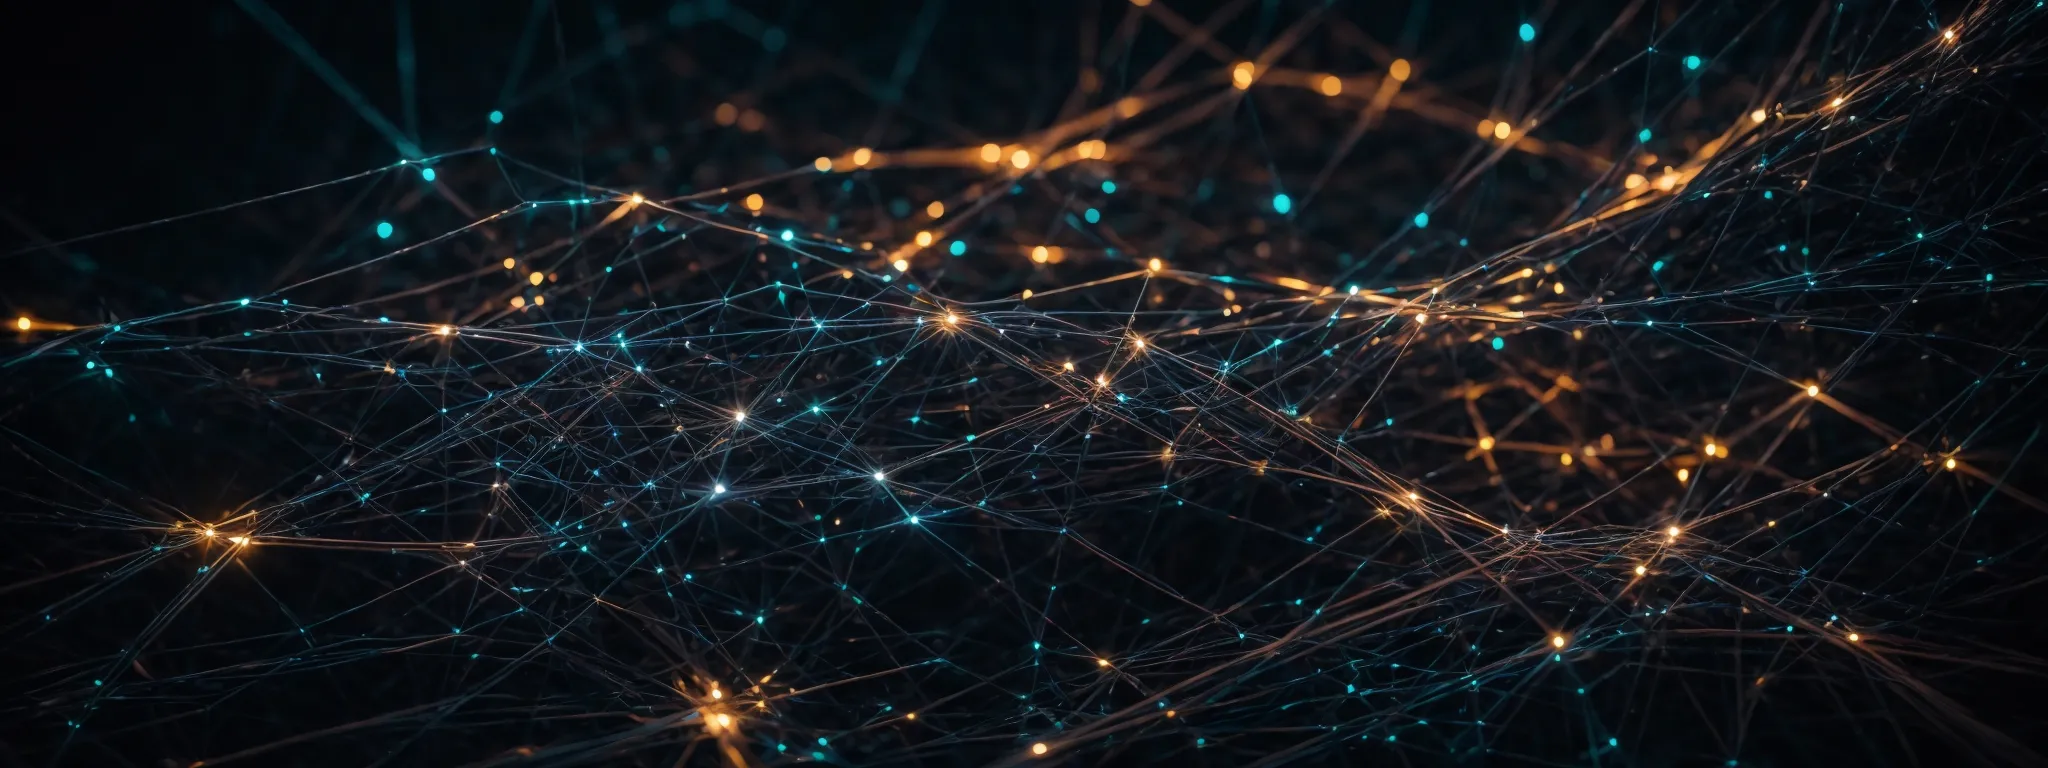 an illuminated network of interconnected nodes and pathways glowing against a dark background to symbolize the complex web of digital signals and brand mentions that shape the future of seo.